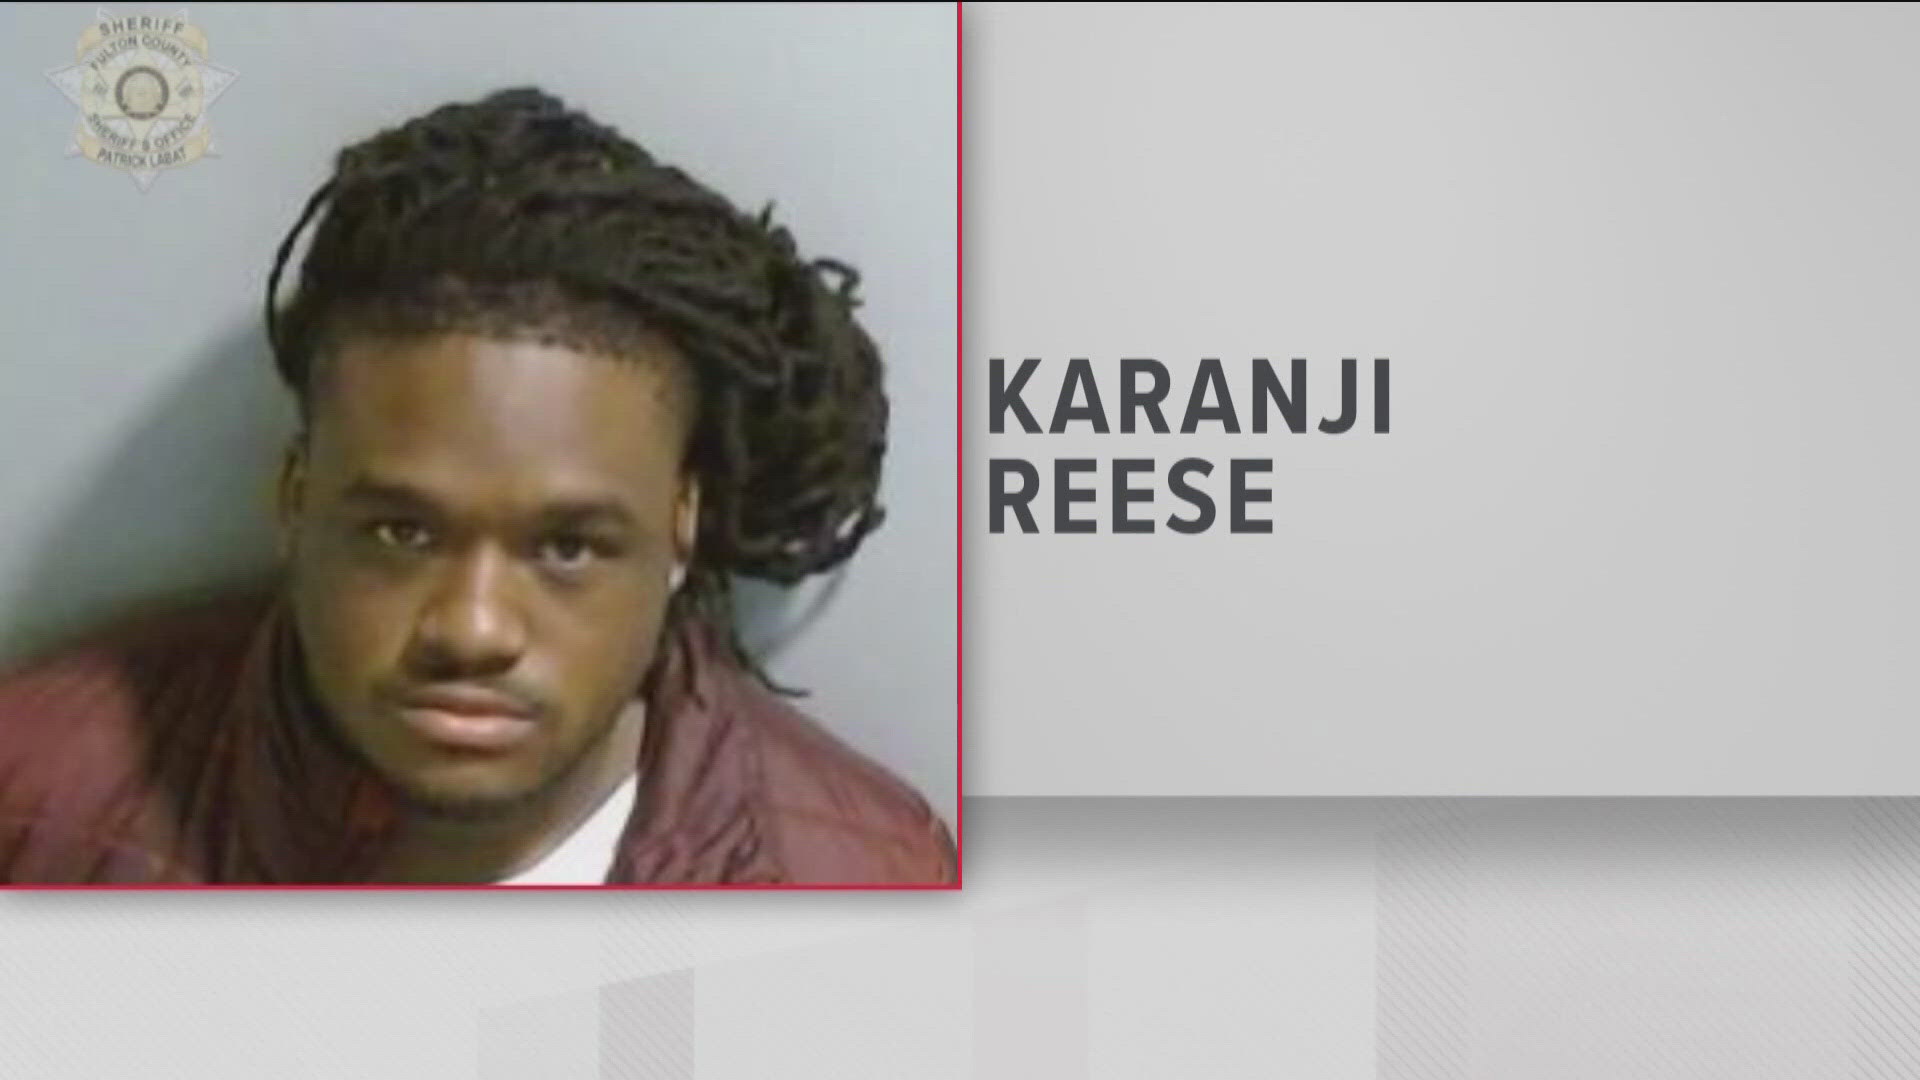 A preliminary hearing will be held today for Karanji Reese, the suspect in the Elleven45 Lounge shooting that left two dead.